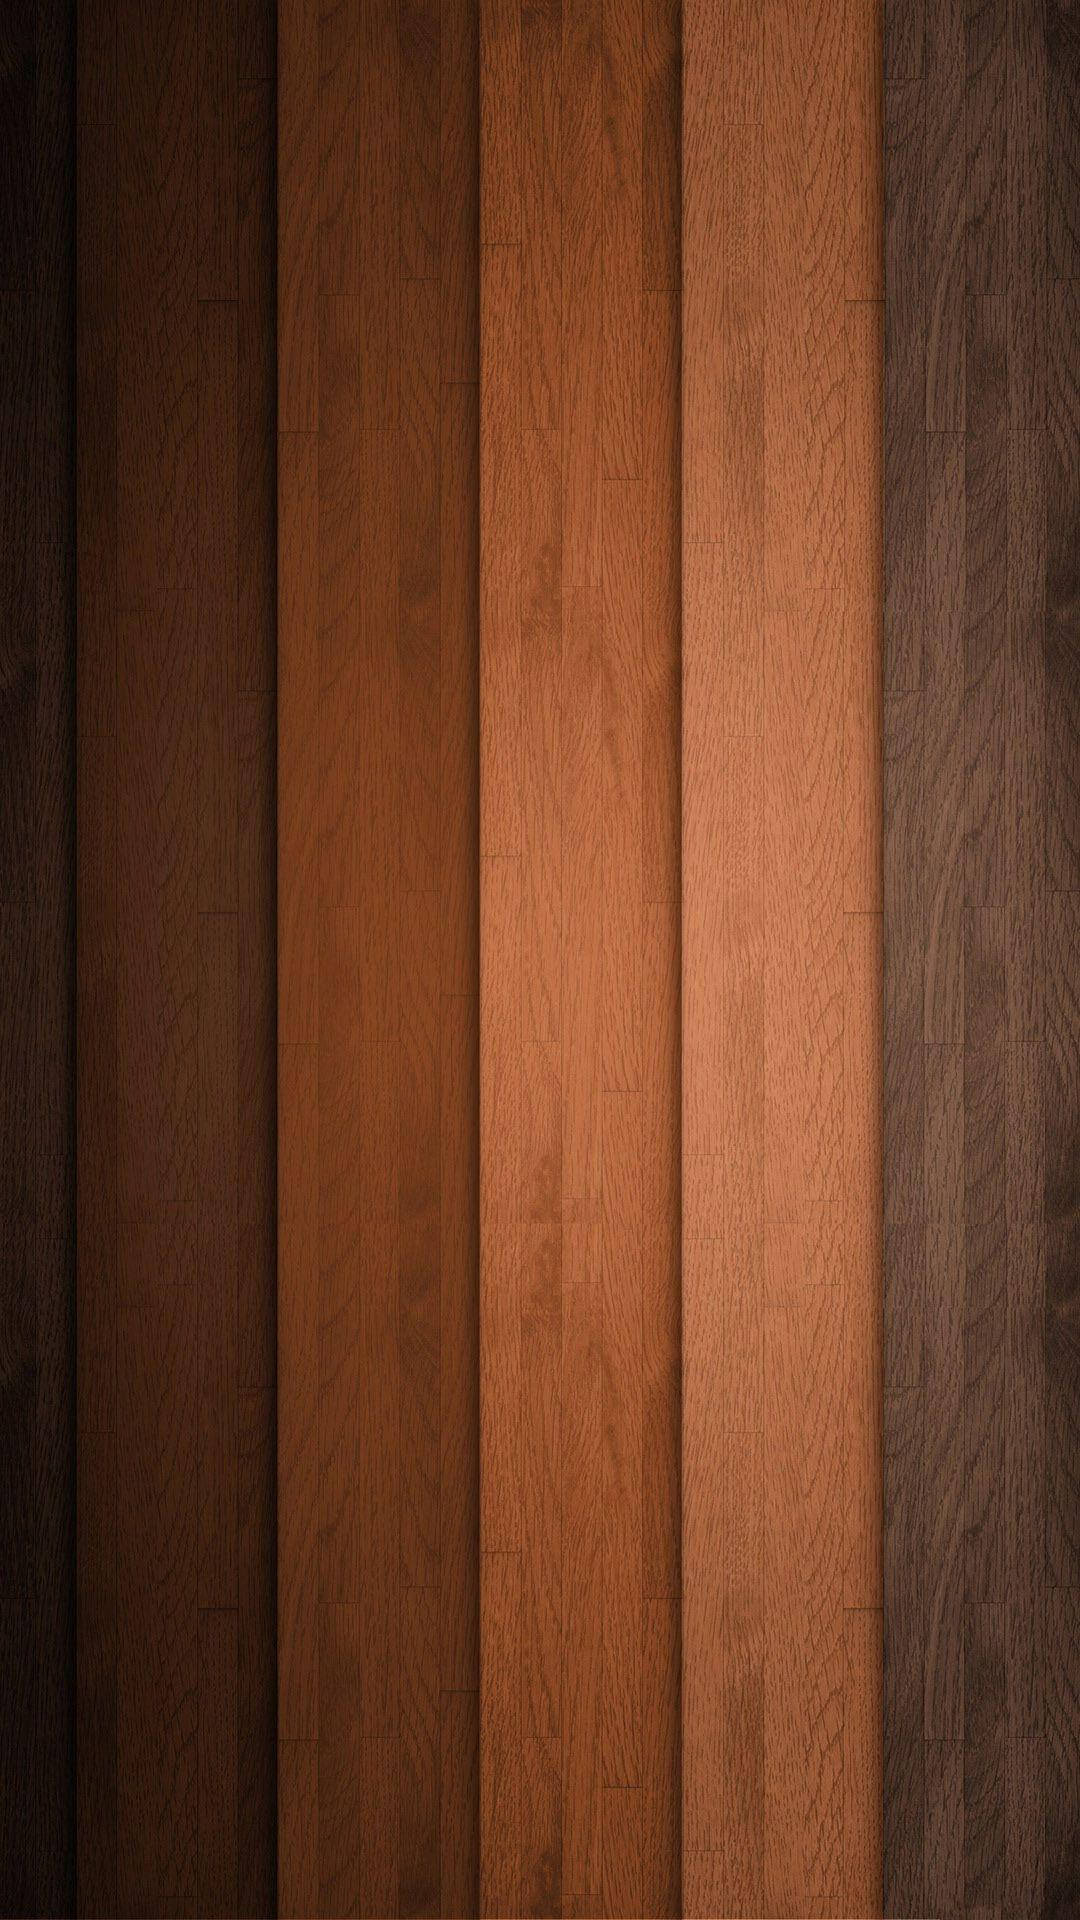 Free Brown Iphone Wallpaper Downloads, [100+] Brown Iphone Wallpapers for  FREE 